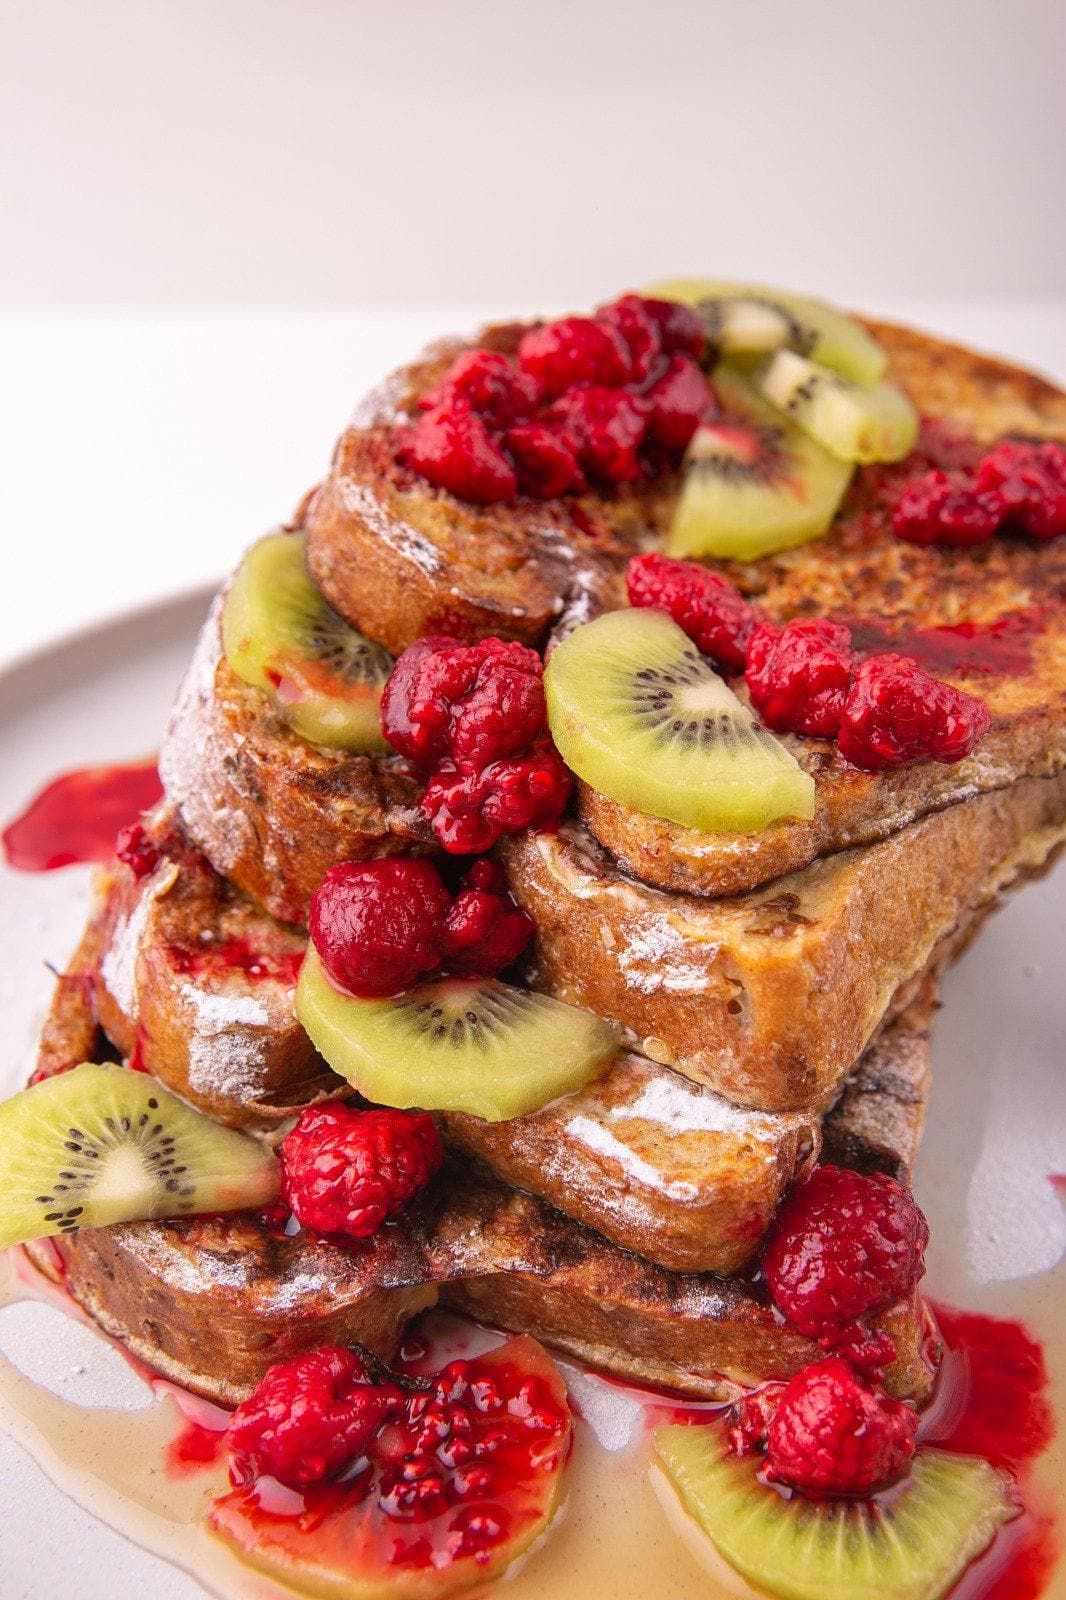 An Image Of Keto French Toast